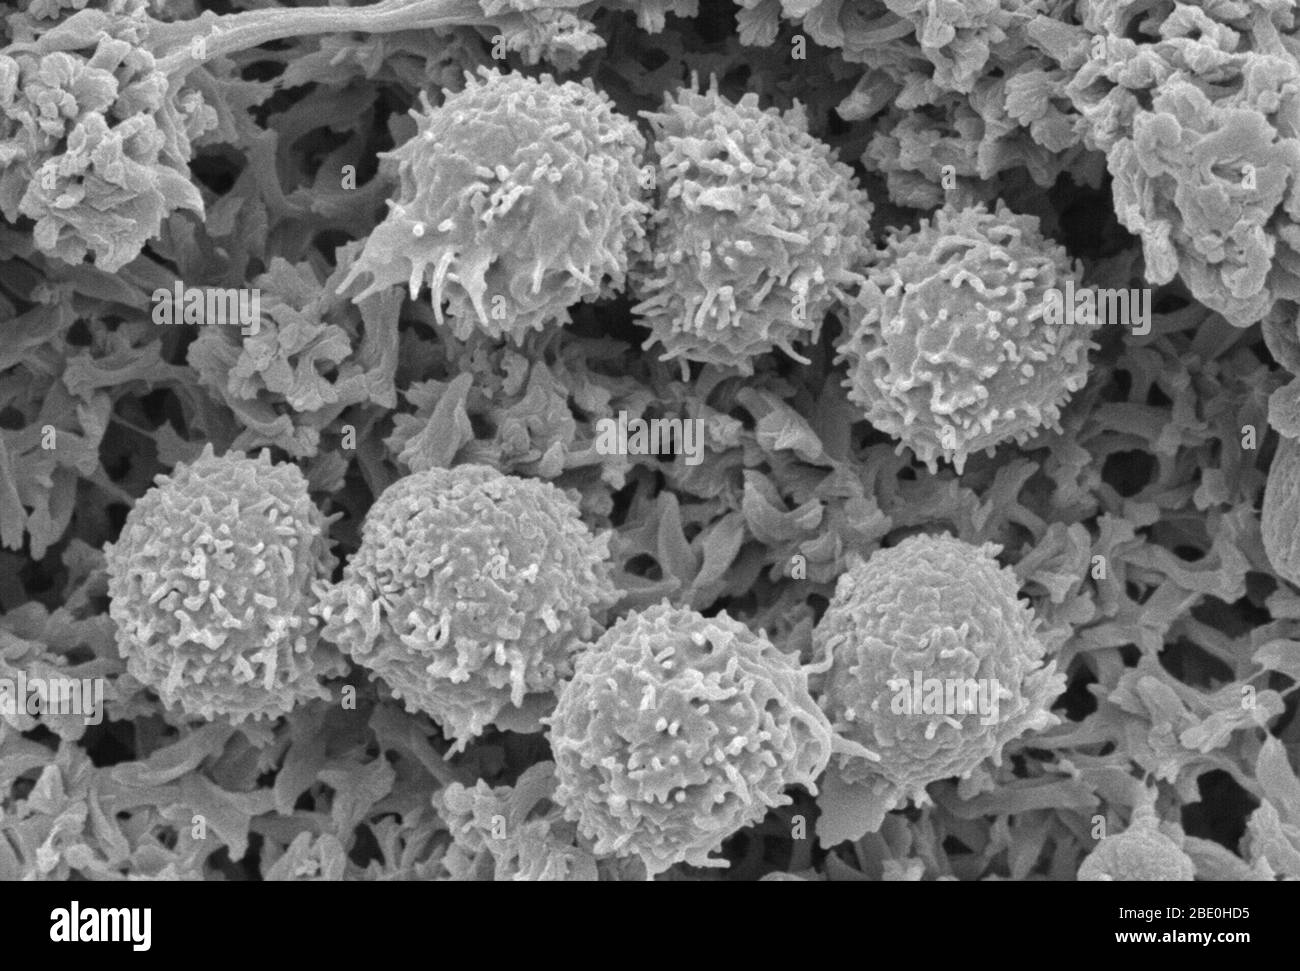 Scanning Electron Micrograph (SEM) showing lymphocytes (white blood cells). A lymphocyte is one of the subtypes of white blood cell in a vertebrate's immune system. Lymphocytes include natural killer cells (NK cells) (which function in cell-mediated, cytotoxic innate immunity), T cells (for cell-mediated, cytotoxic adaptive immunity), and B cells (for humoral, antibody-driven adaptive immunity). They are the main type of cell found in lymph, which prompted the name lymphocyte. Magnification unknown. Stock Photo